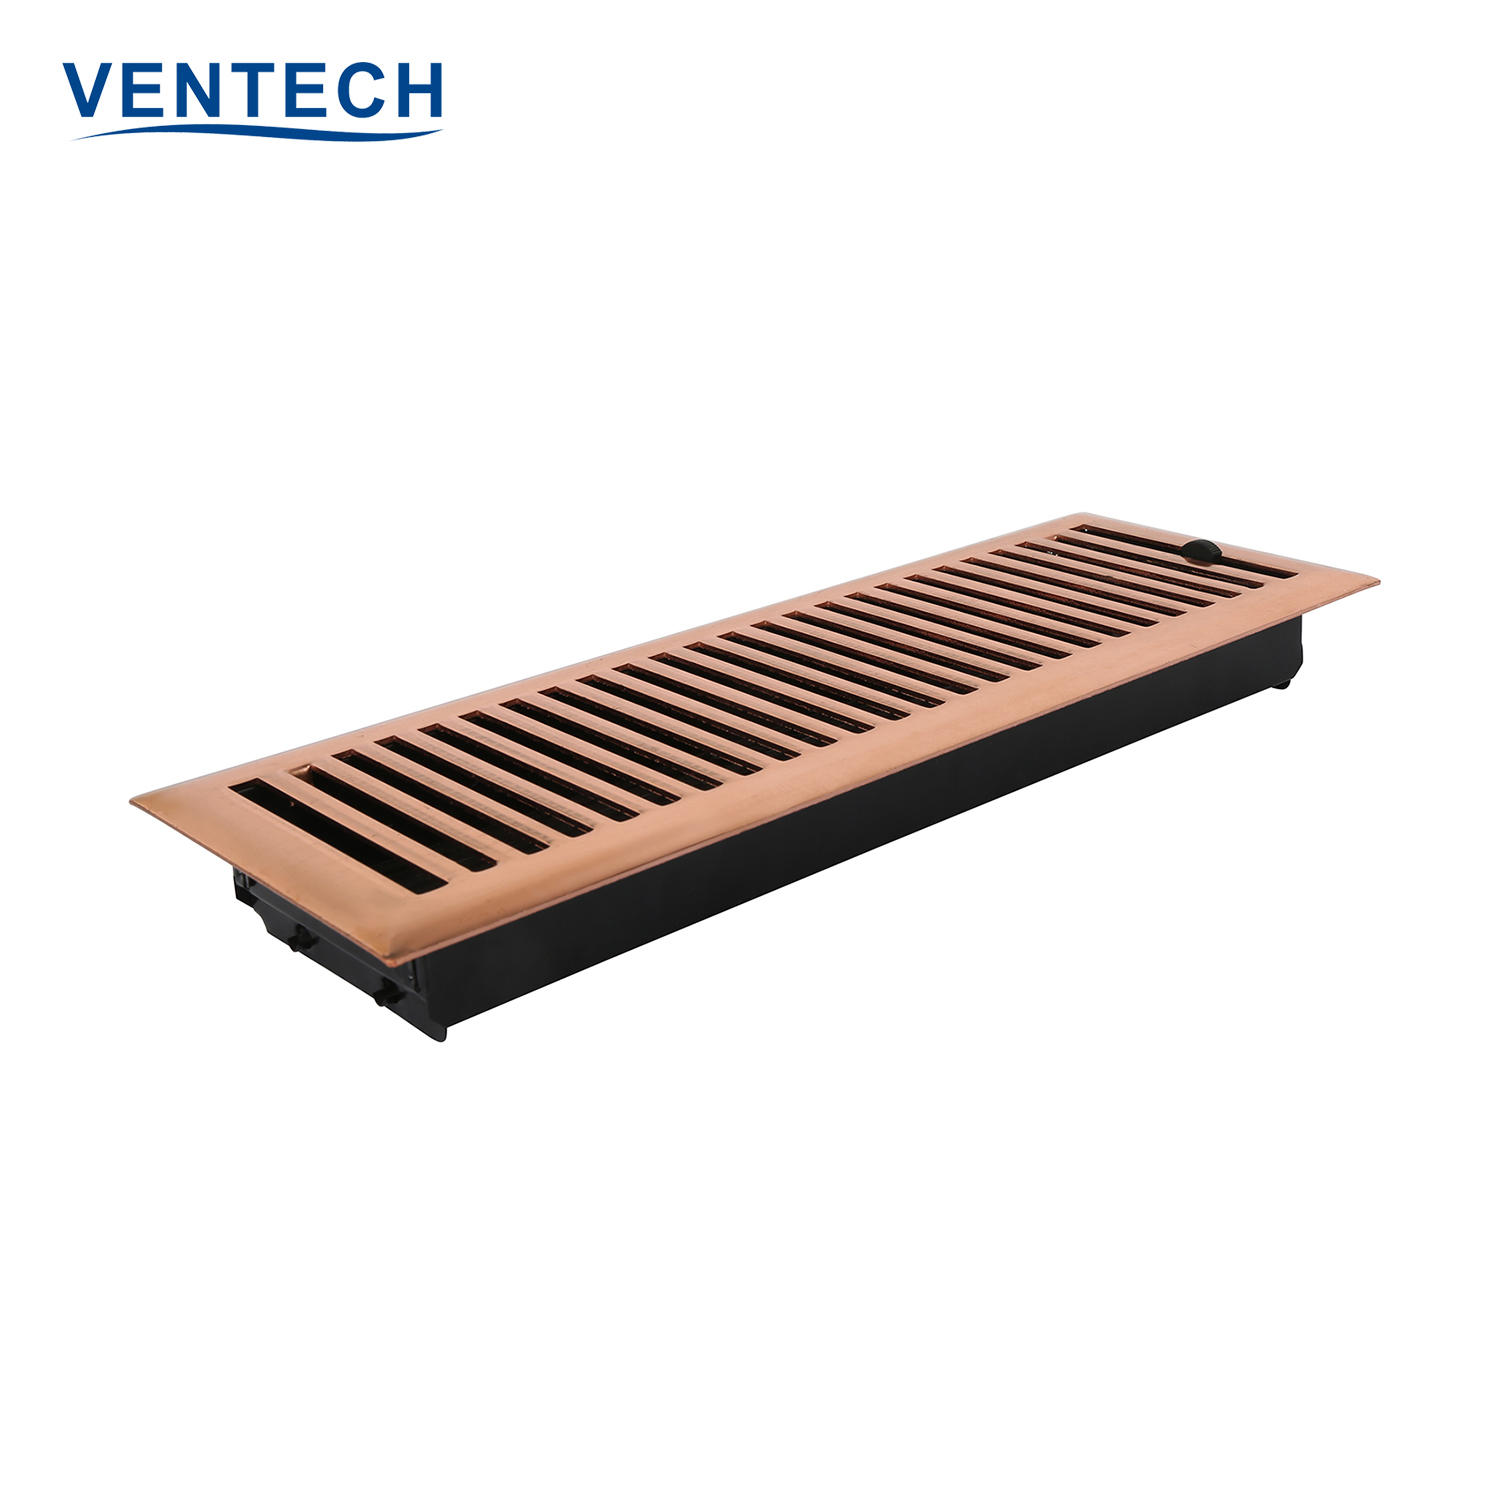 Hvac System Exhaust Air Ducting Aluminum Insulated  Flexible Air Duct Floor Grilles For Ventilation